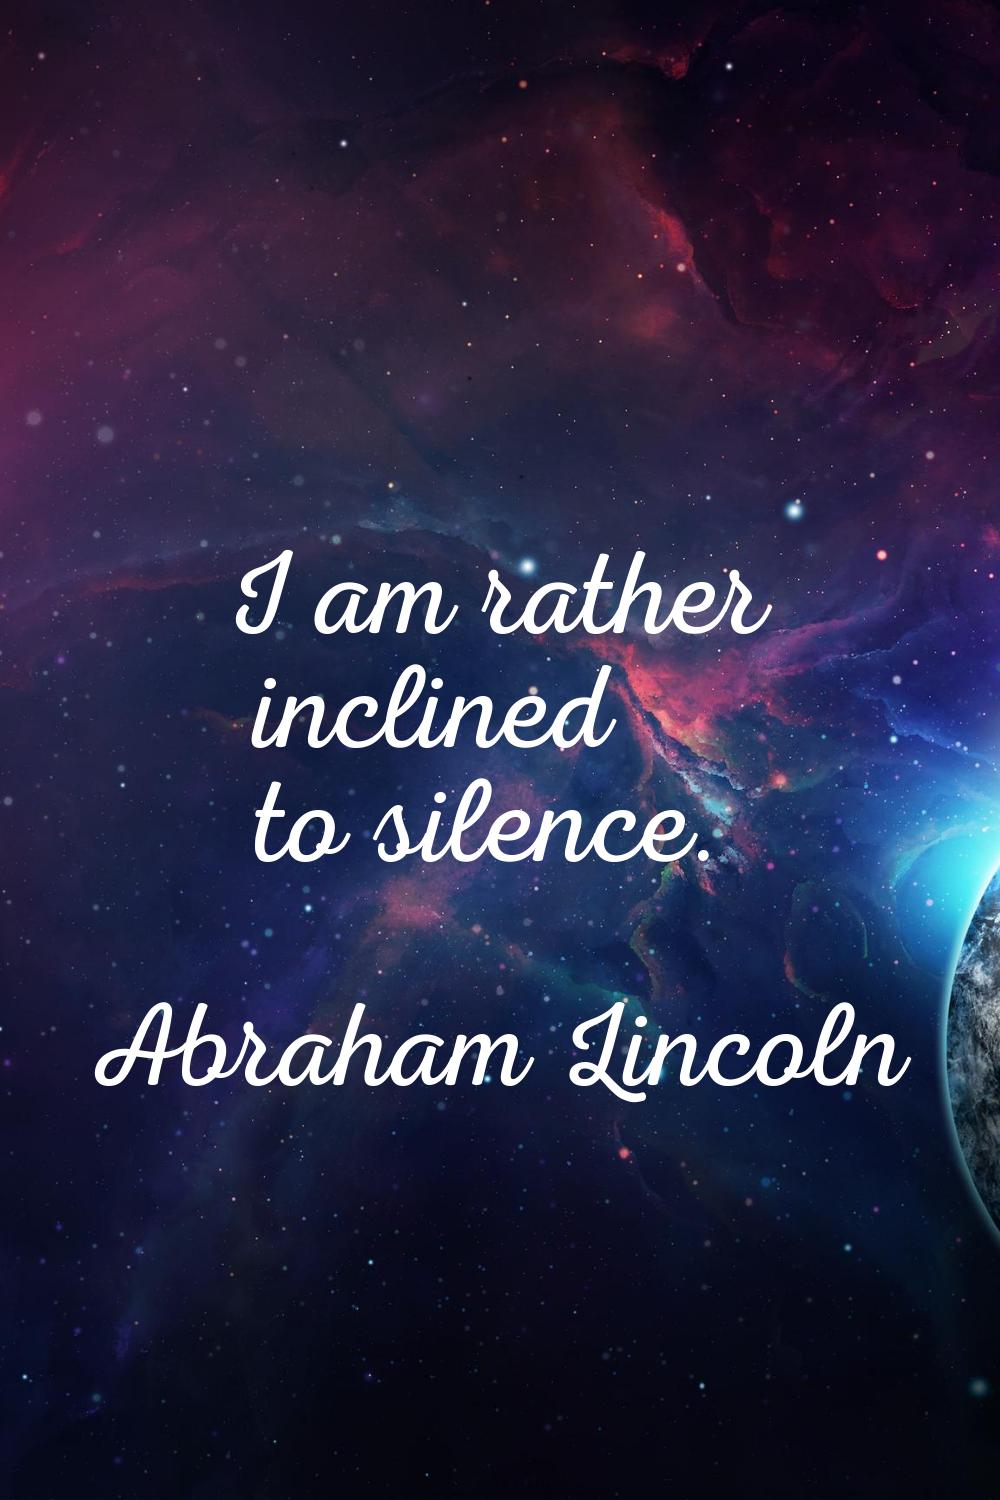 I am rather inclined to silence.